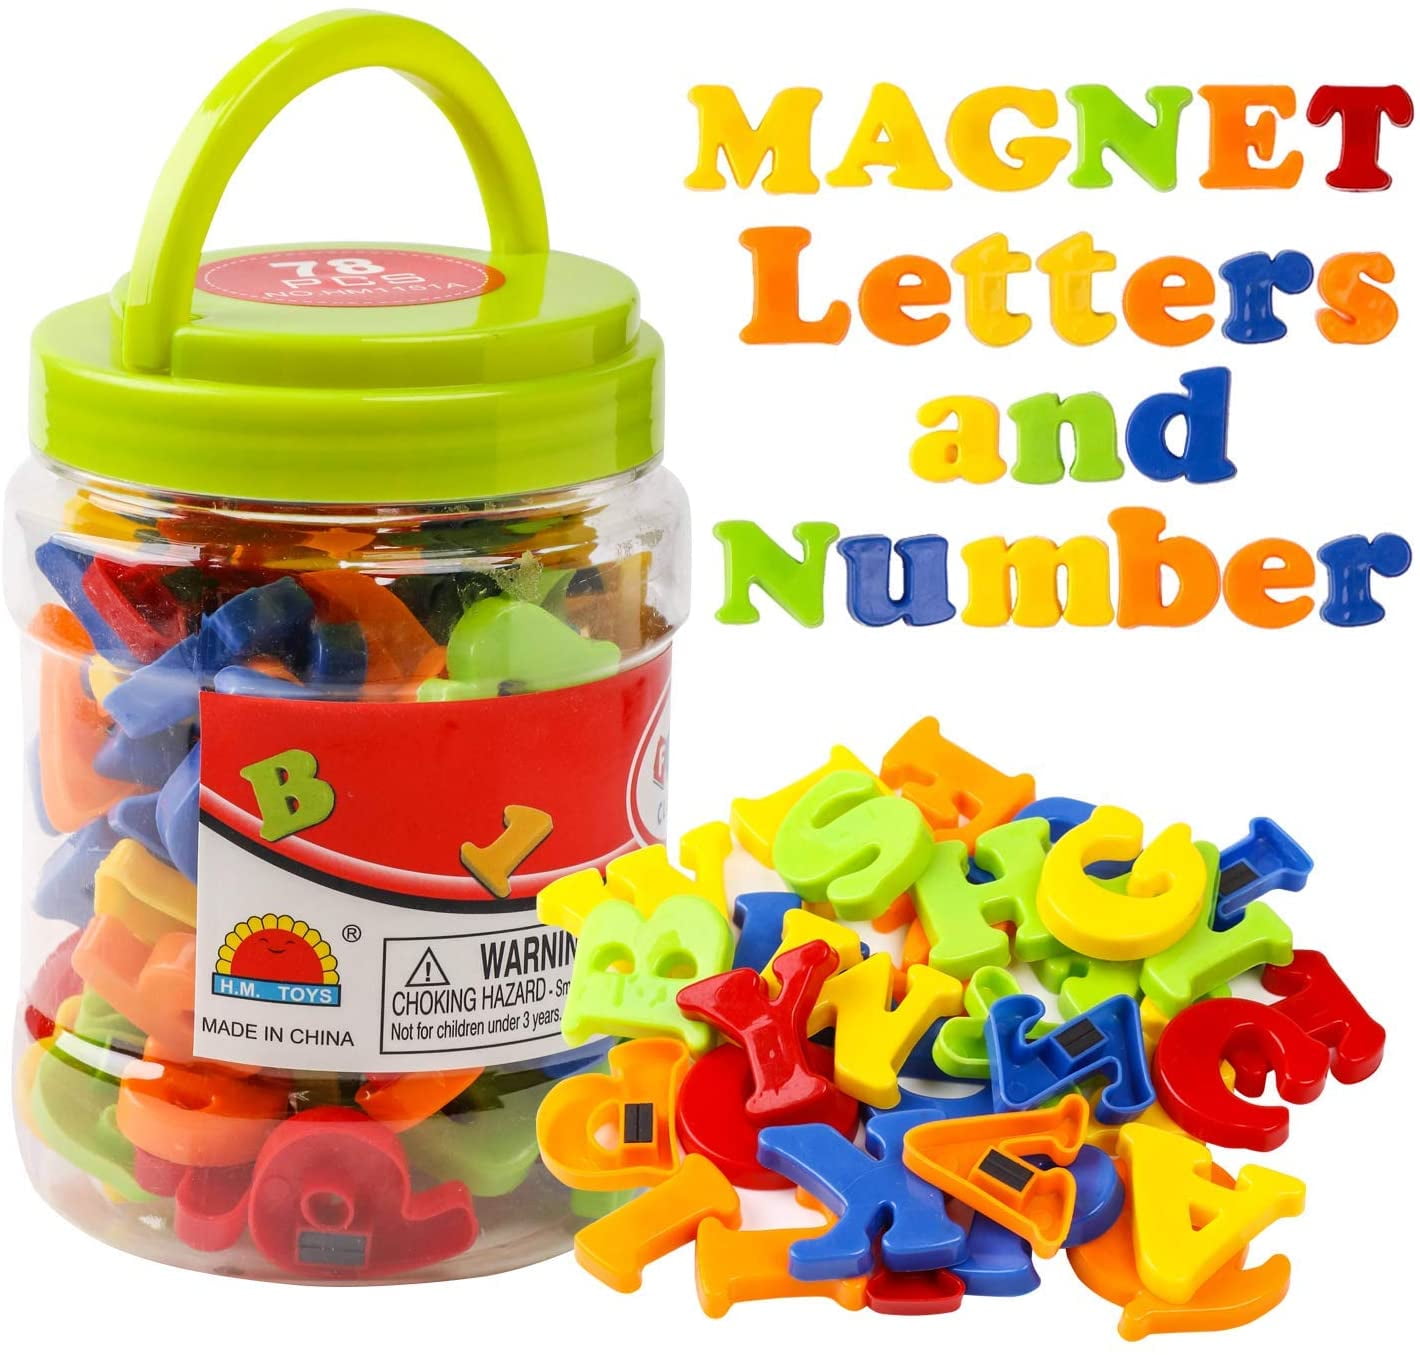 Plastic Toy Set Educational Alphabet Magnets Letters,Numbers Toy ABC 123 